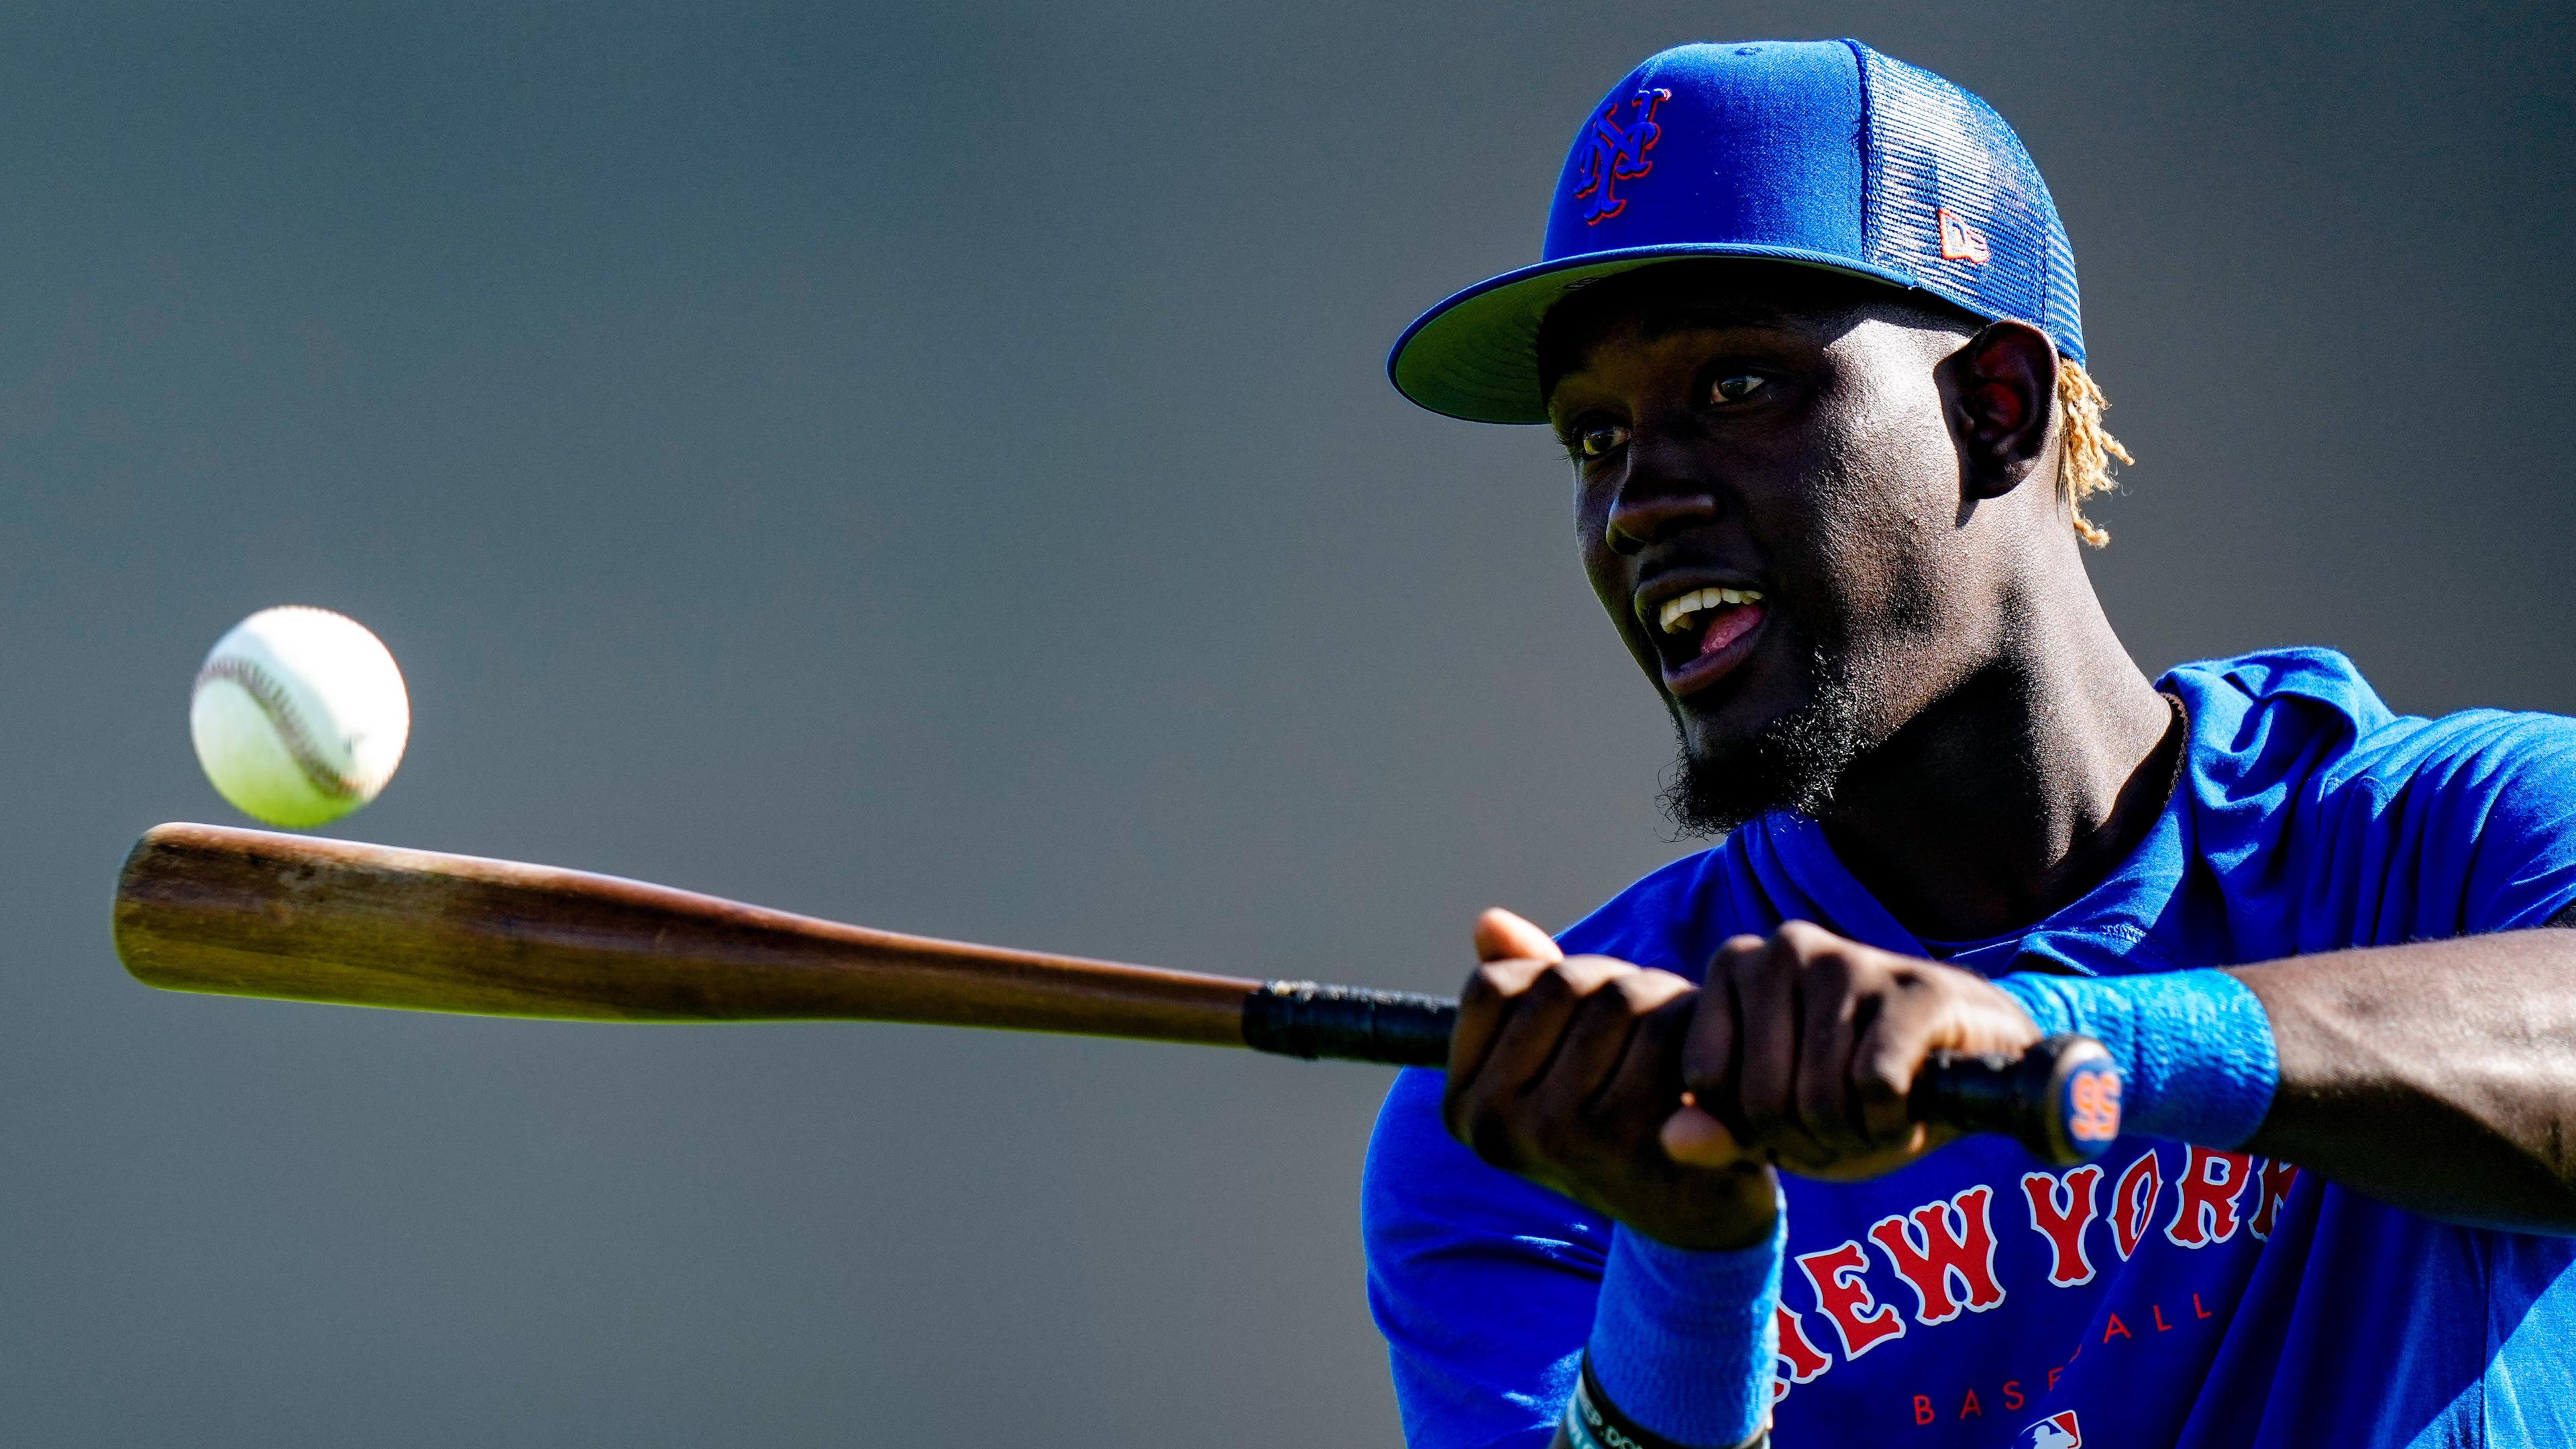 Feb 20, 2023; Port St. Lucie, FL, USA; New York Mets shortstop Ronny Mauricio (60) during spring training workouts. Mandatory Credit: Rich Storry-USA TODAY Sports / © Rich Storry-USA TODAY Sports